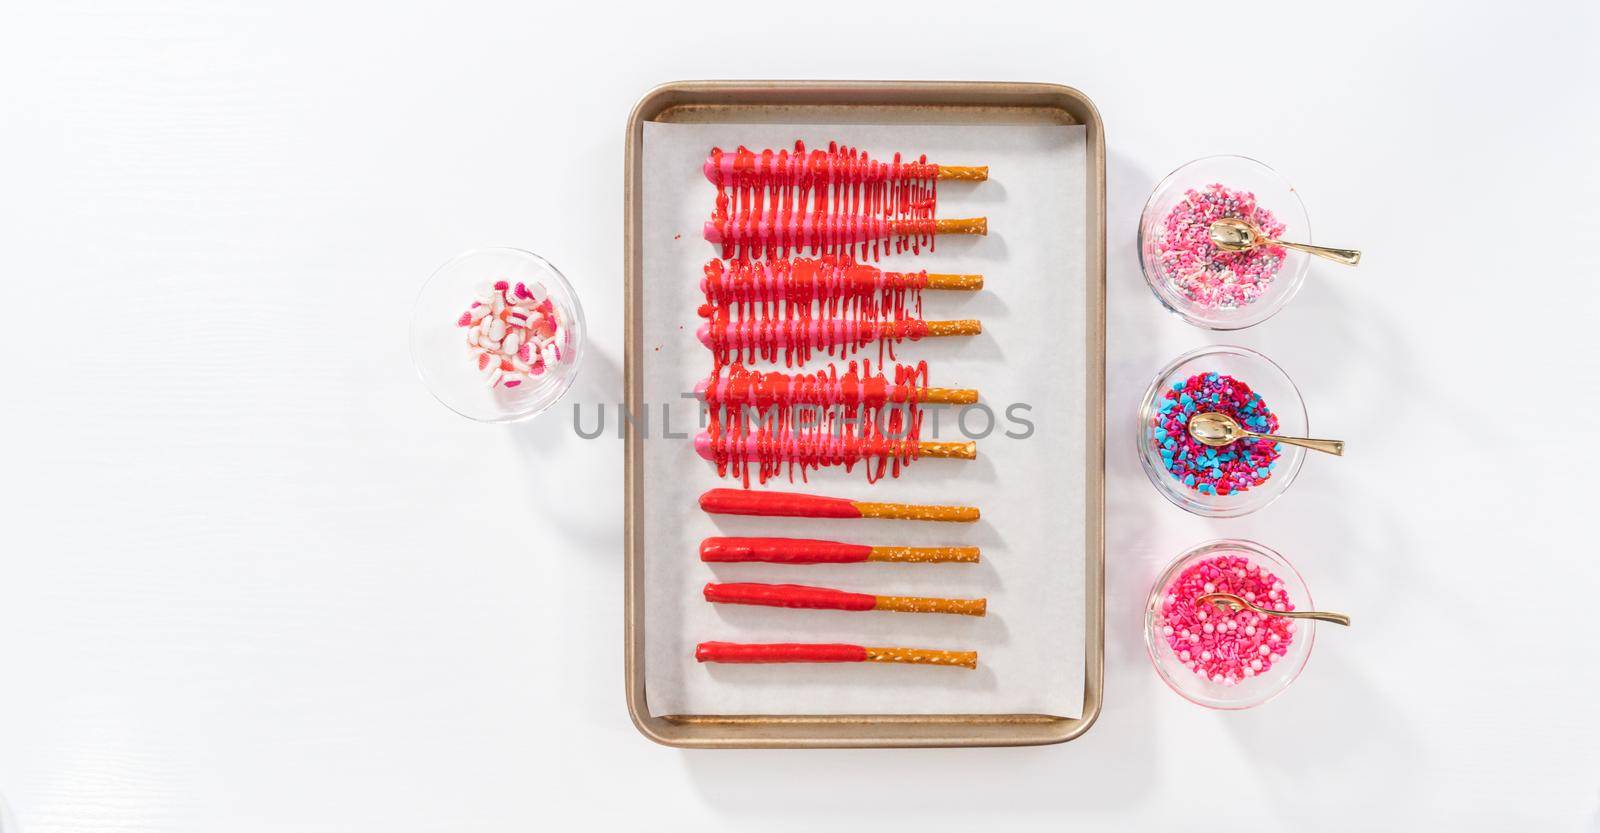 Flat lay. Drizzling melted chocolate over chocolate-dipped pretzels rods and decorating with sprinkles to make chocolate-covered pretzel rods for Valentine's Day.